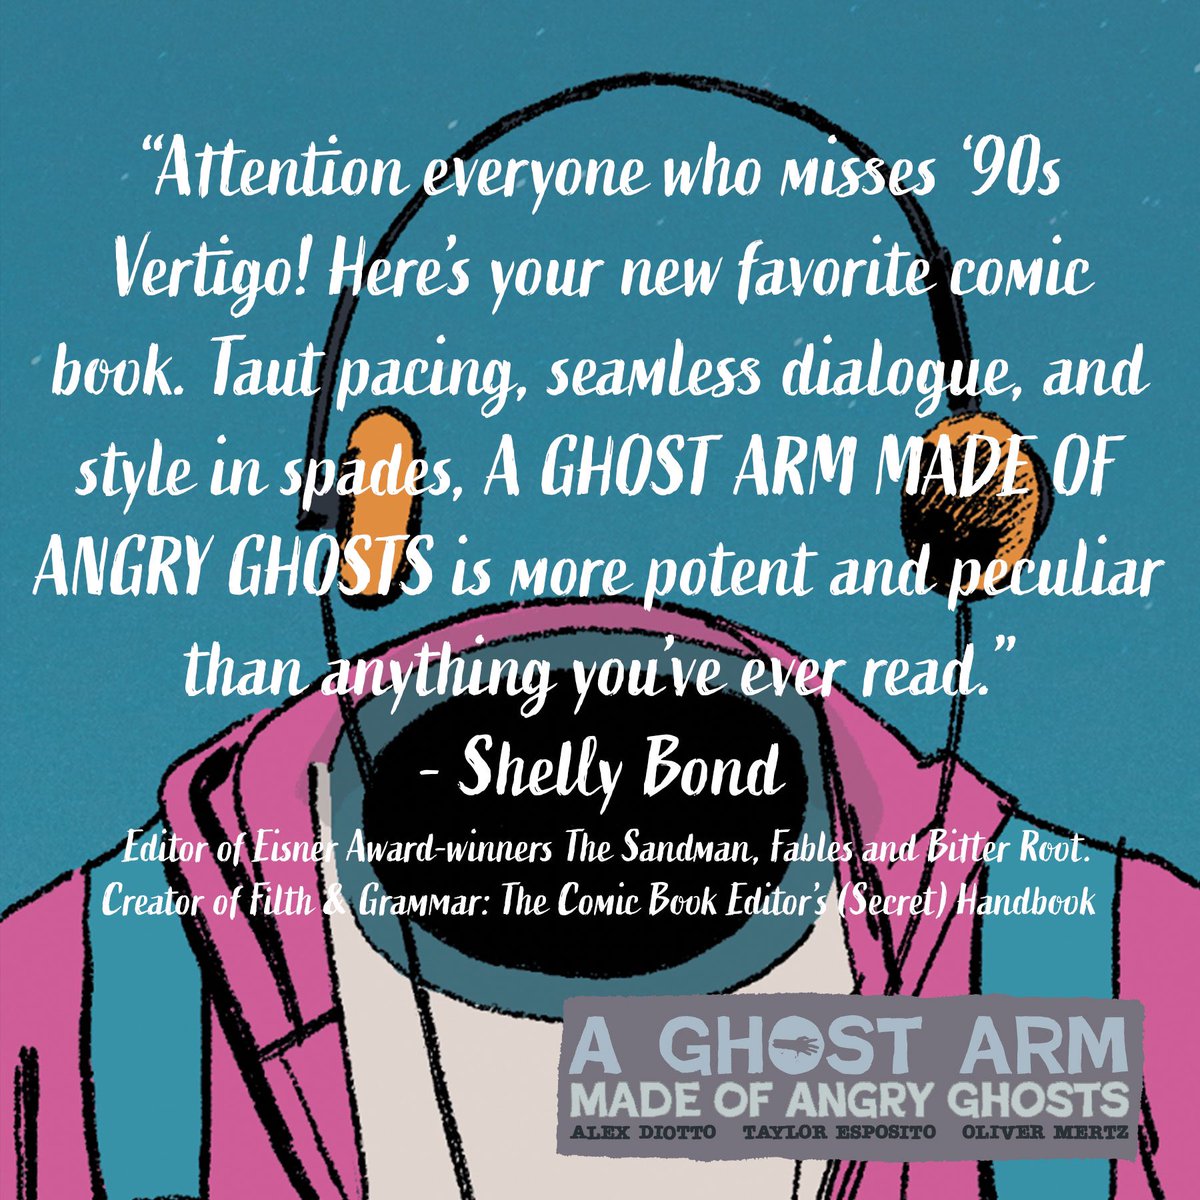 Think of your all-time favorite comic and most likely Shelly Bond worked on it. She not only elevates every comic she works on, but her contributions to comics have elevated the medium itself. That’s why it’s a huge honor that she said such nice things about Ghost Arm.